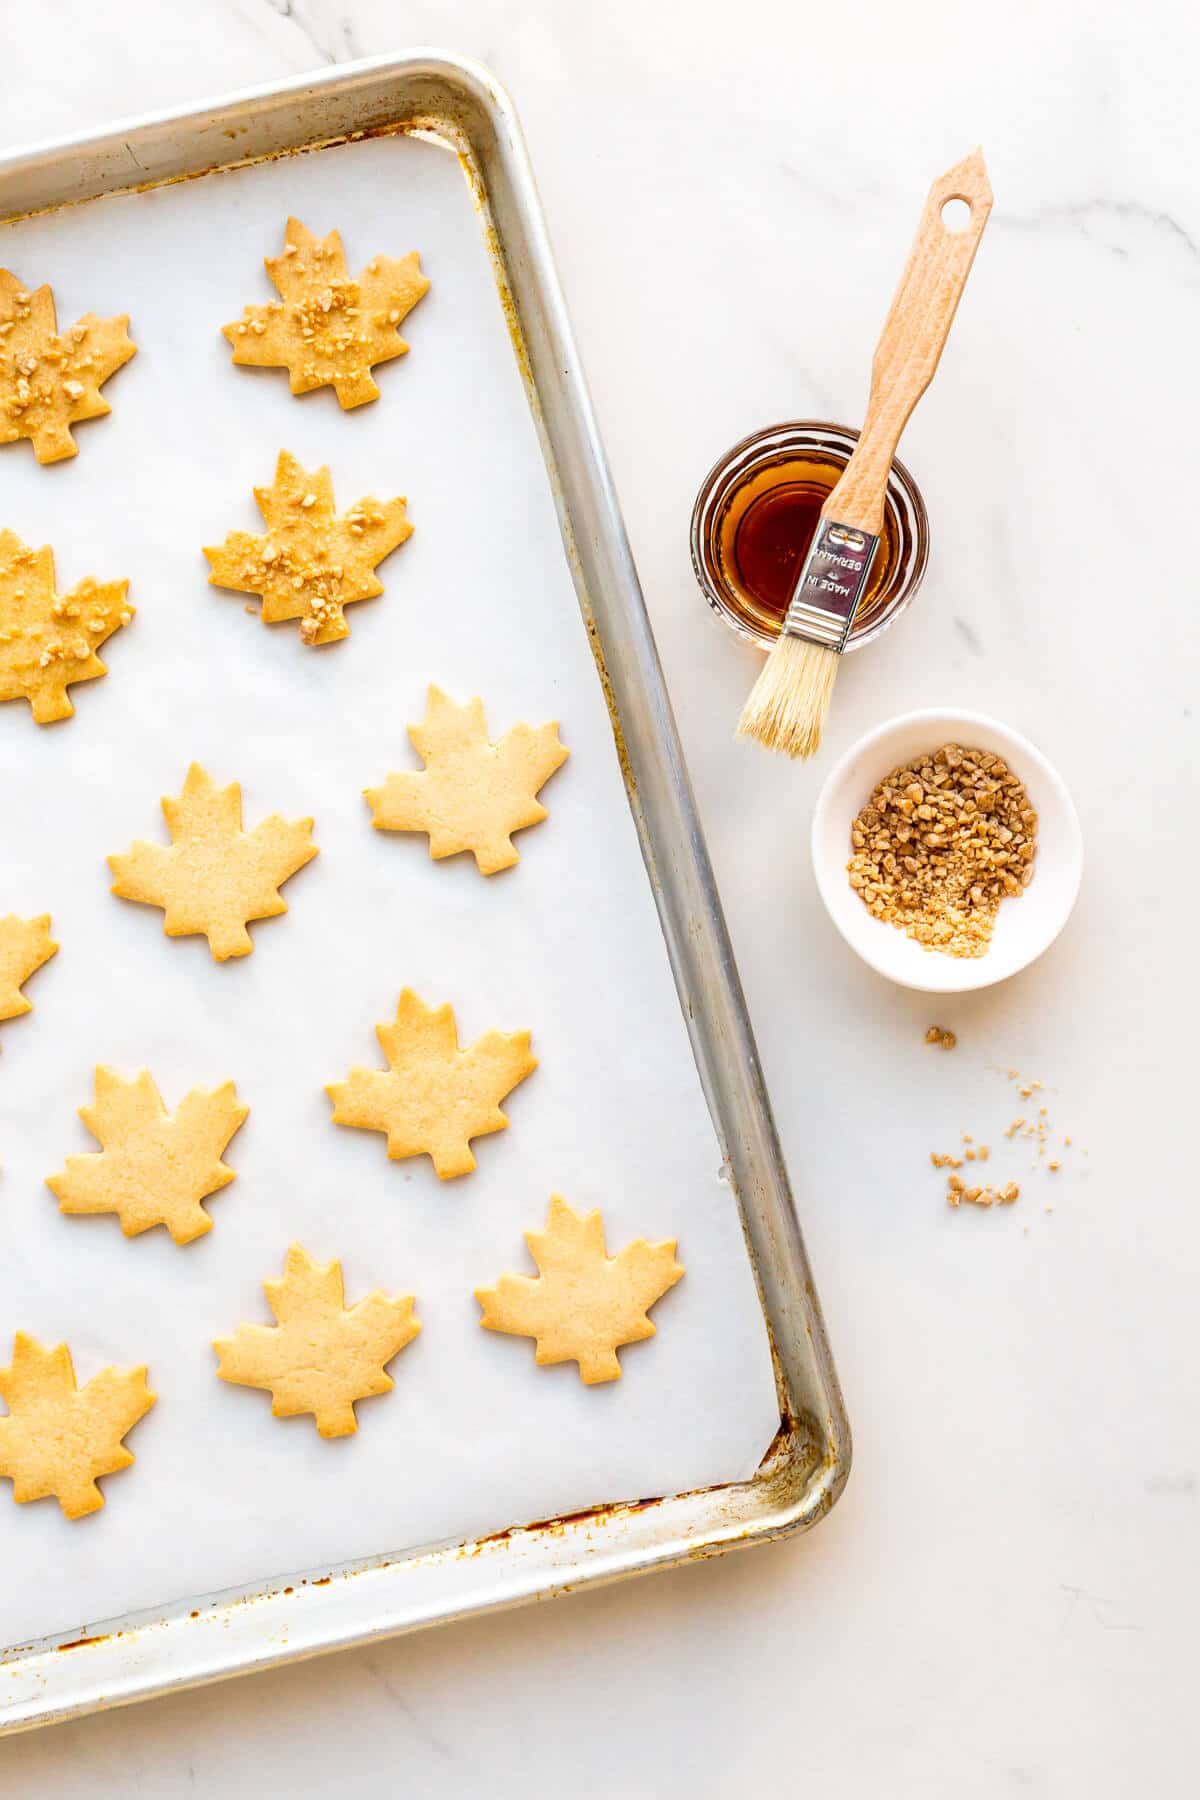 Glazing maple shortbread cookies with maple syrup and sprinkling with maple flakes to add more flavour before serving.